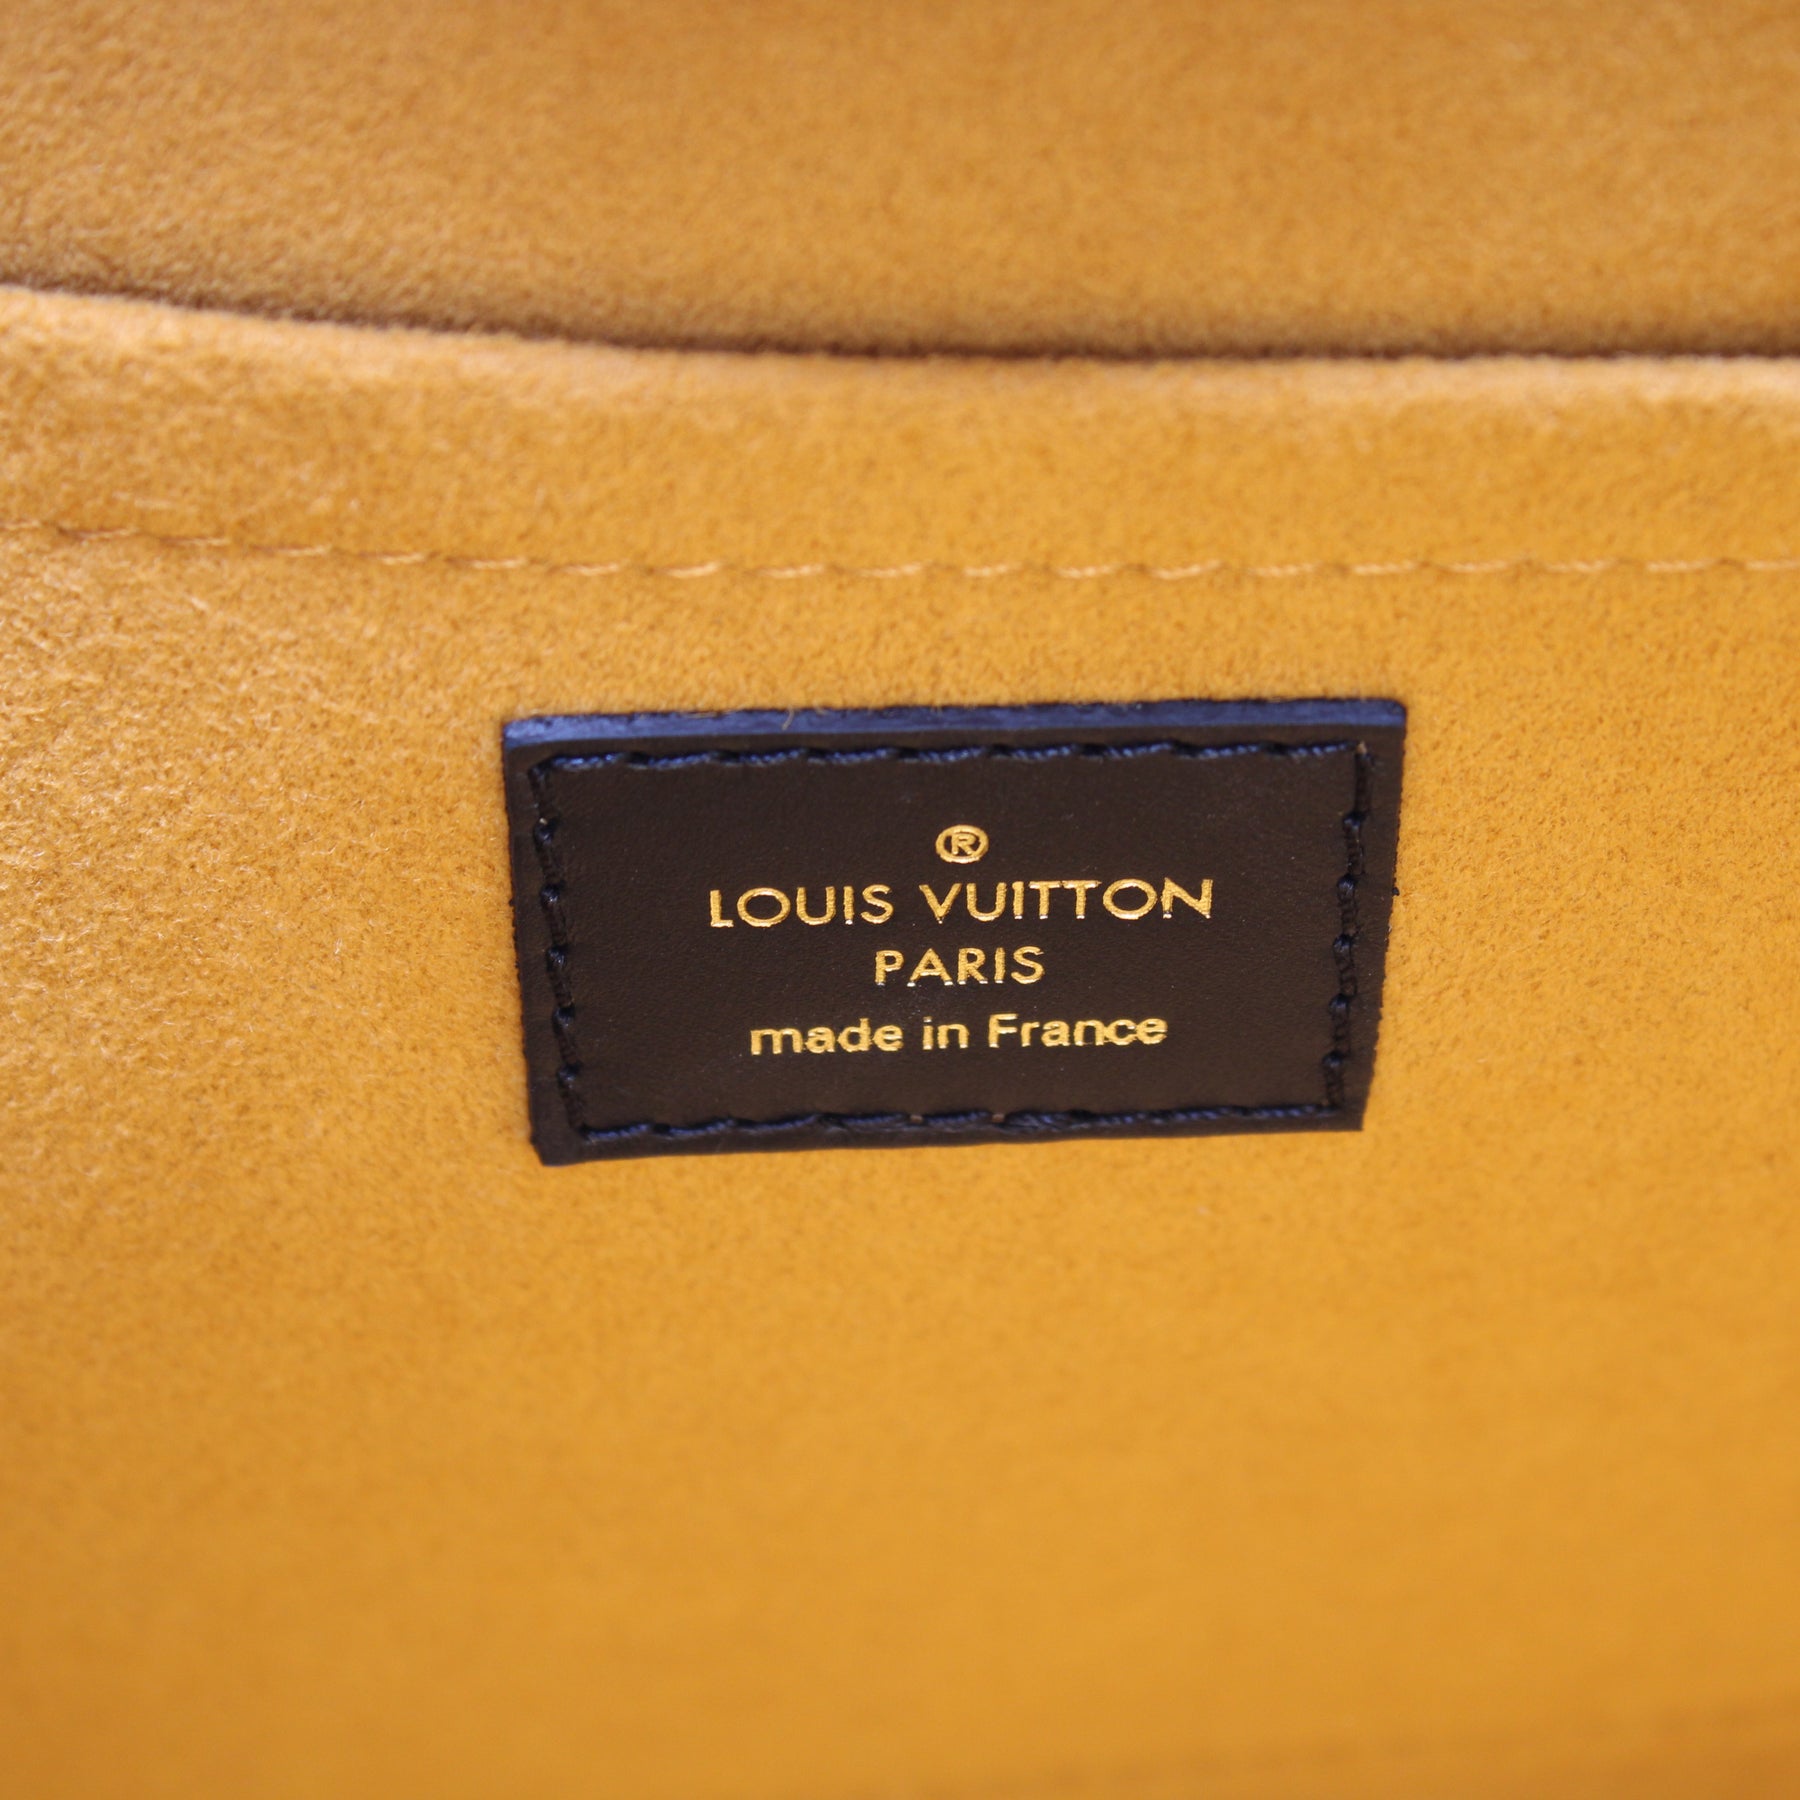 Louis Vuitton on My Side mm Galet Calf